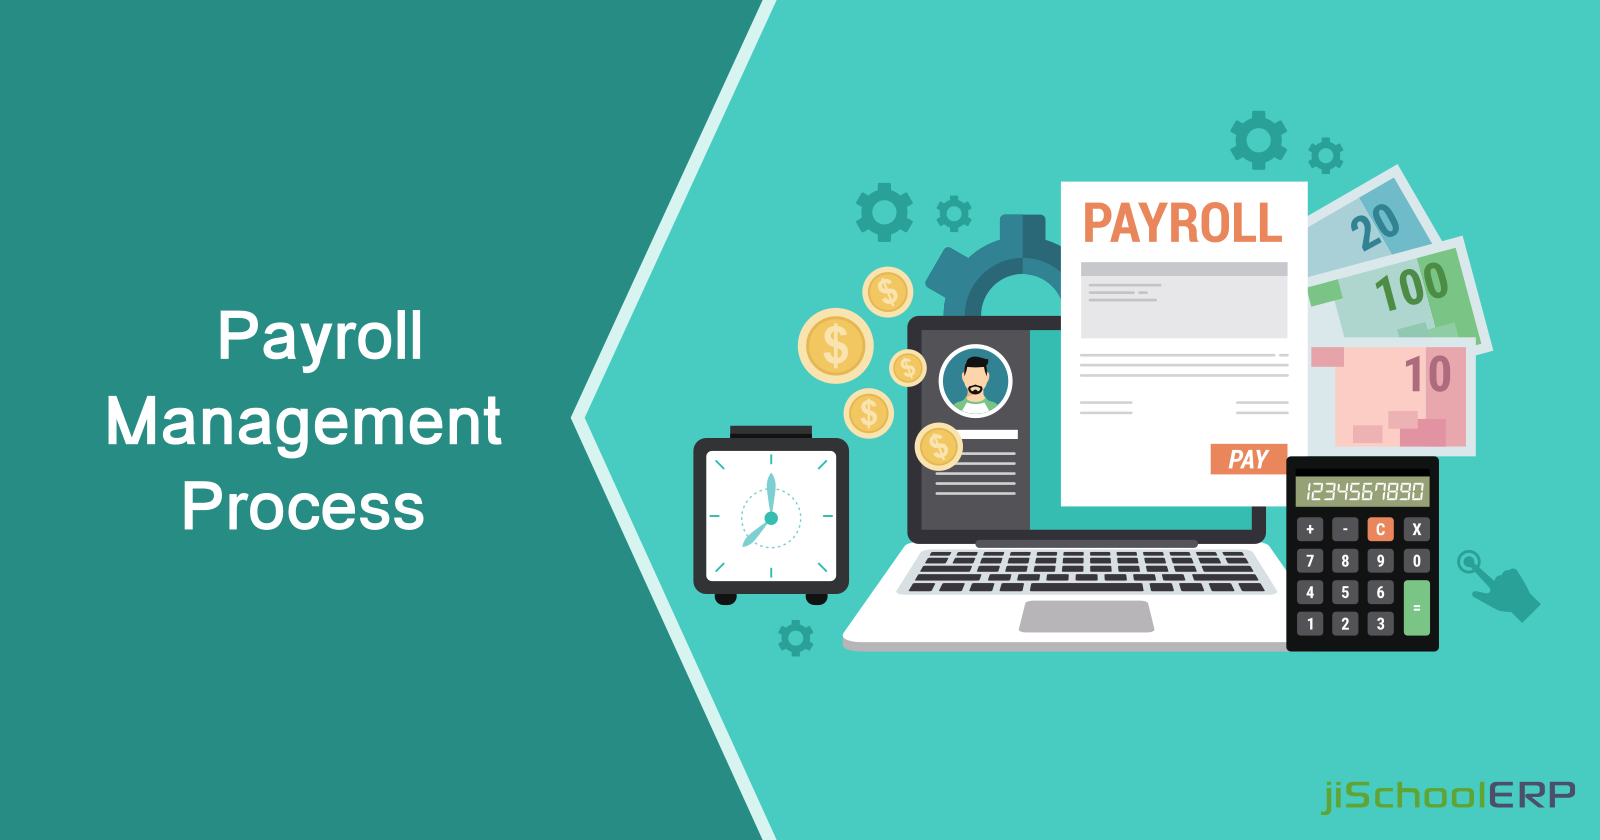 How jiSchoolERP can Help you in Managing Payroll for your School